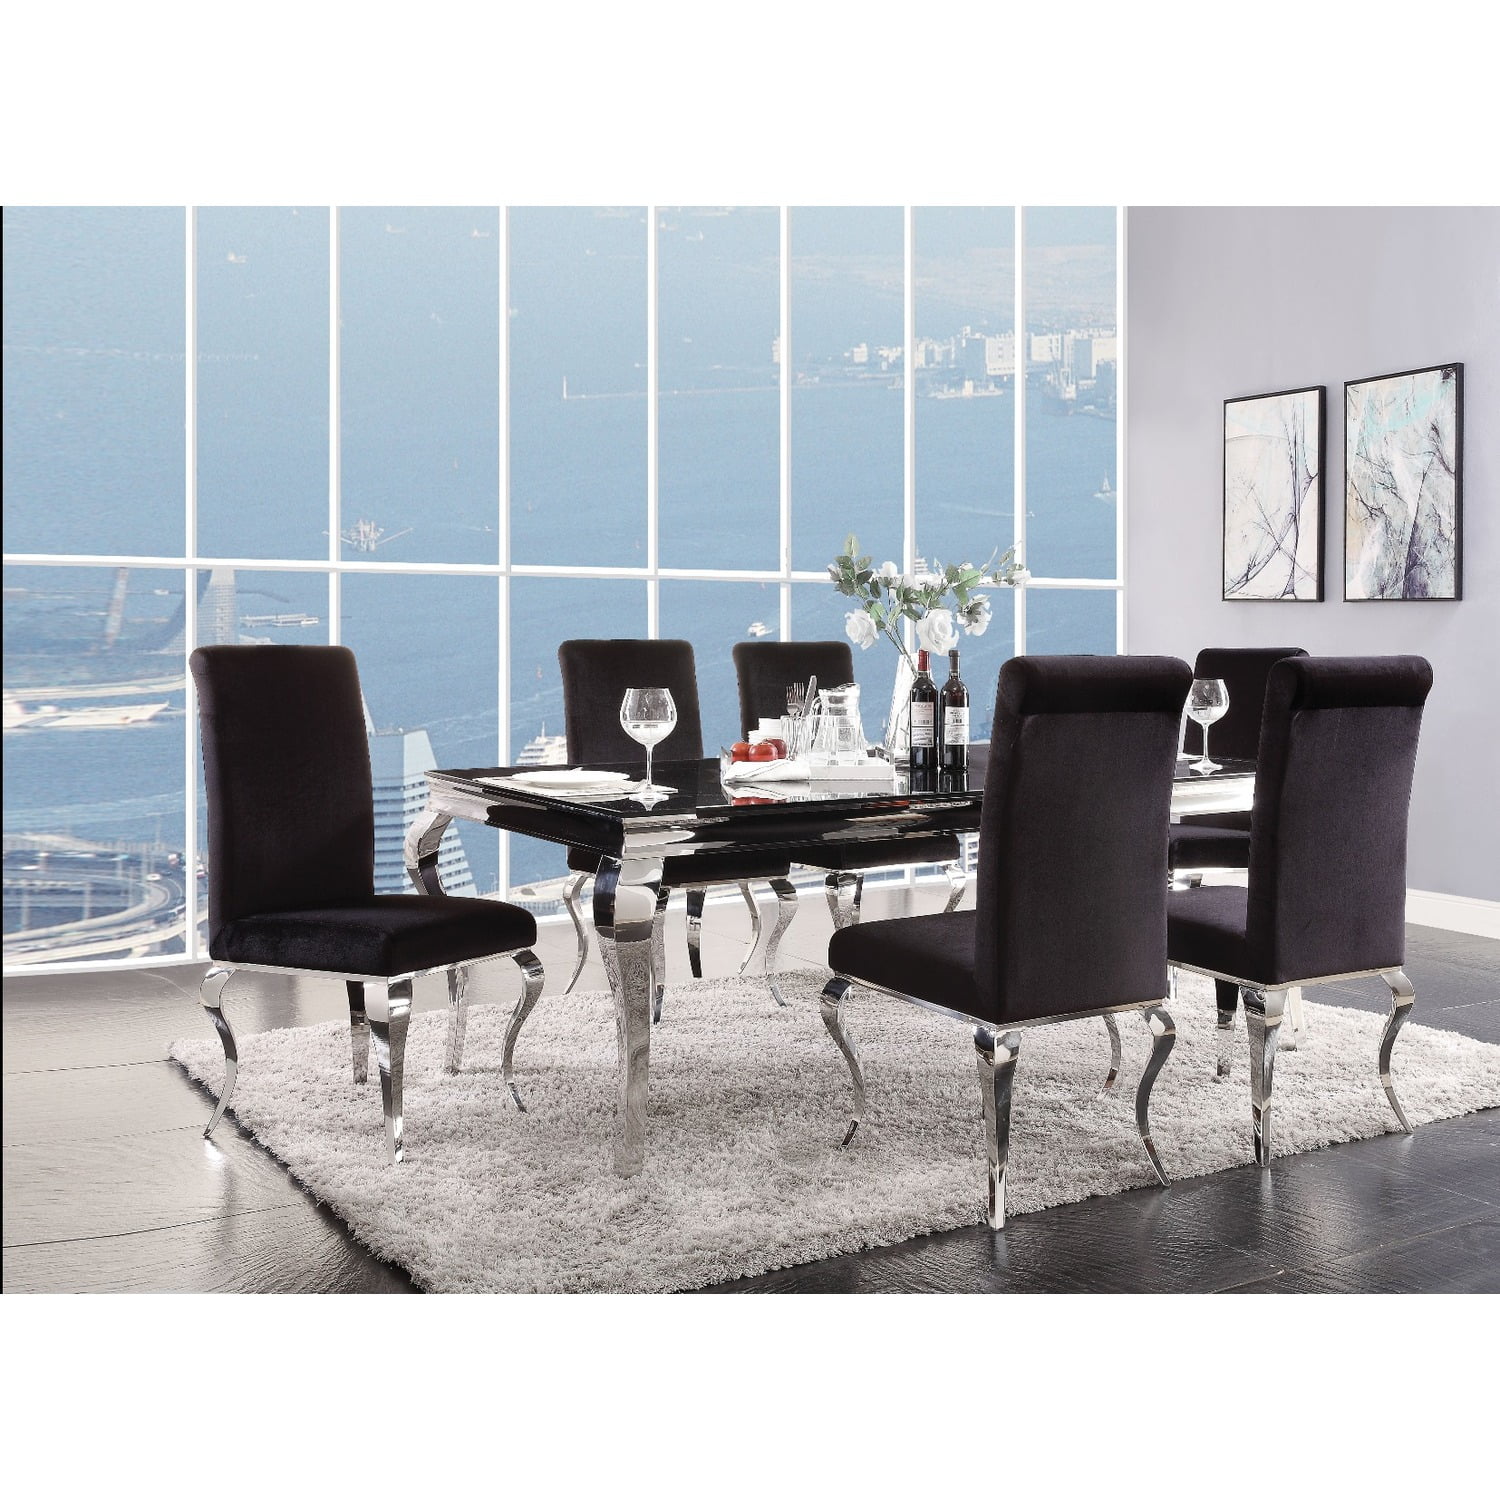 Picture of ACME 62070 3 Piece Rectangular Fabiola Dining Table - Stainless Steel & Black Glass